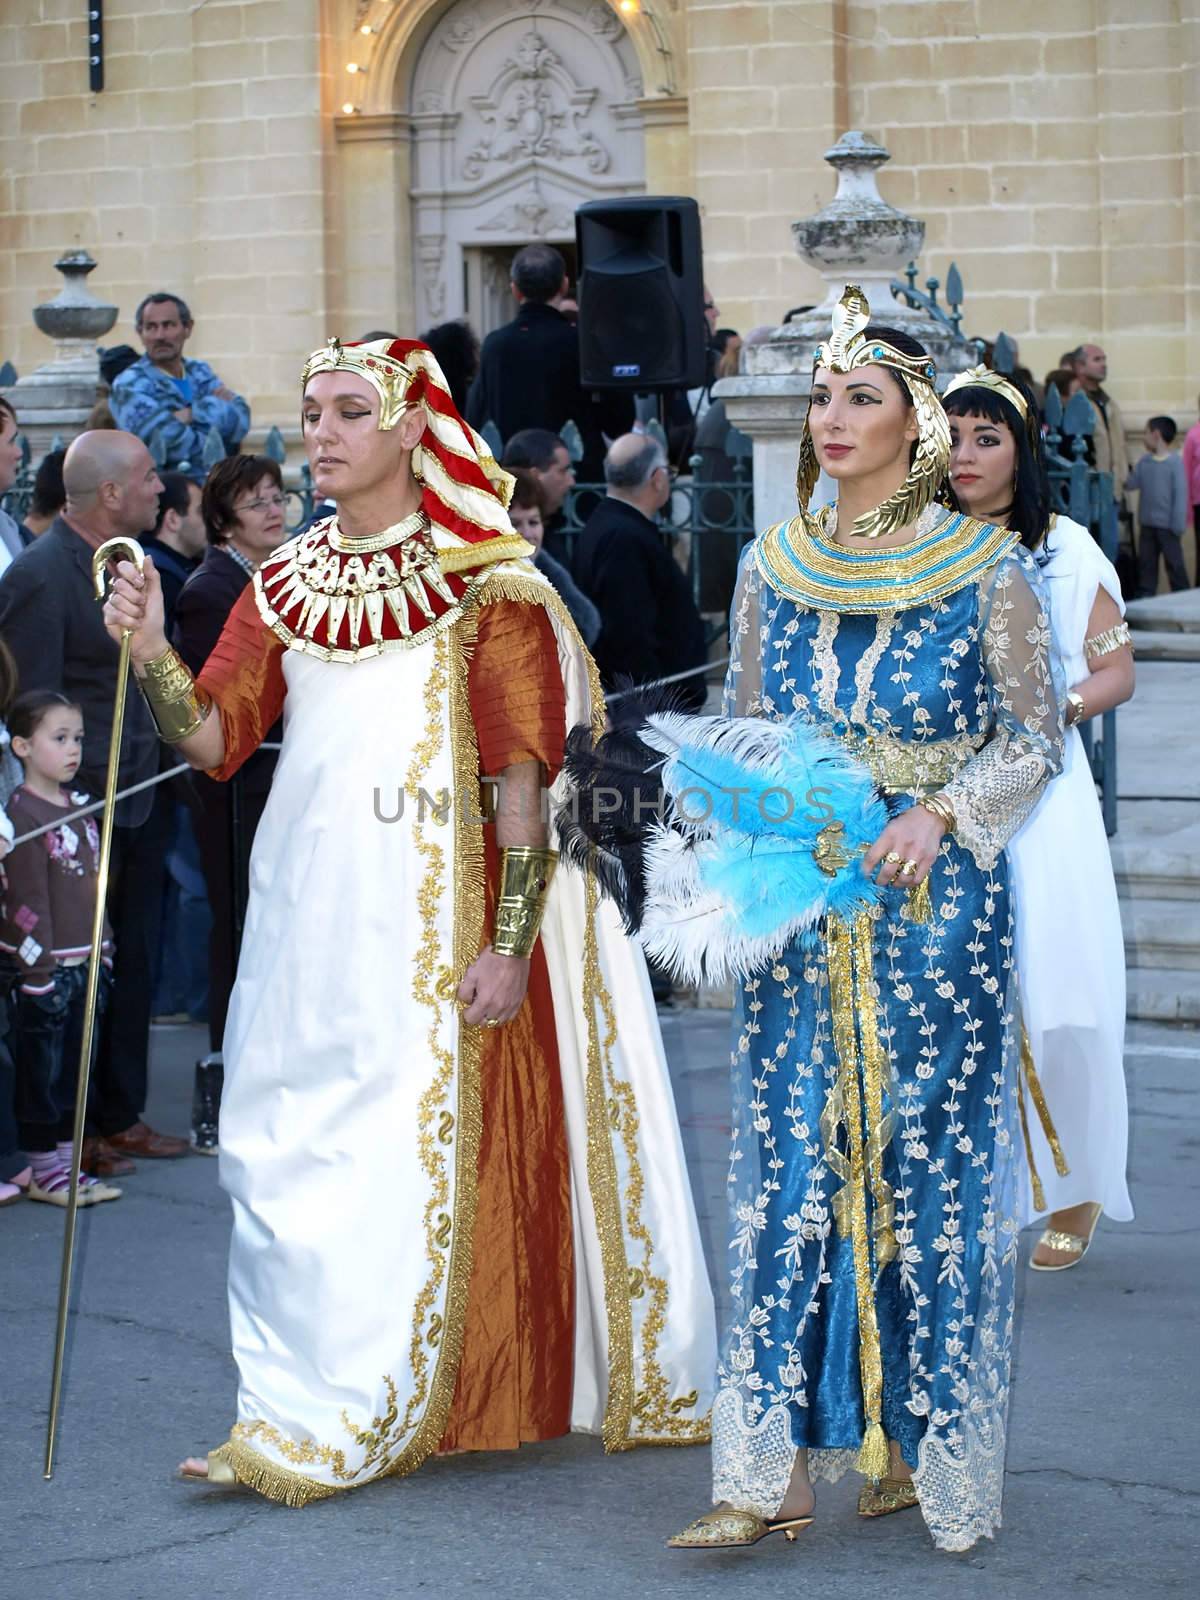 Cleopatra and Rameses by PhotoWorks